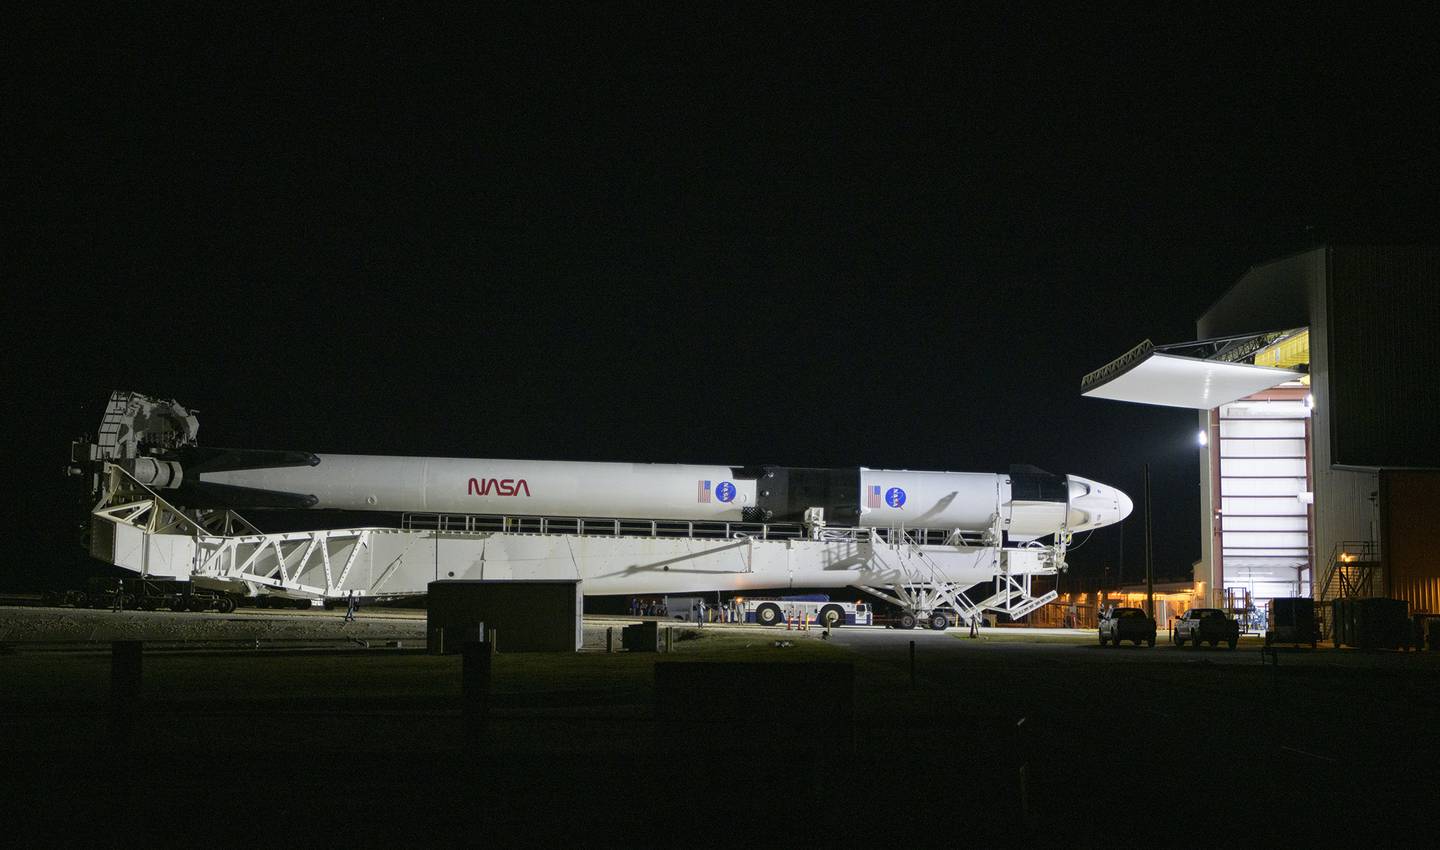 A SpaceX Falcon 9 rocket with the company's Crew Dragon spacecraft is rolled out of the horizontal integration facility at Launch Complex 39A as preparations continue for the Demo-2 mission, Thursday, May 21, 2020, at NASA's Kennedy Space Center in Cape Canaveral, Fla.